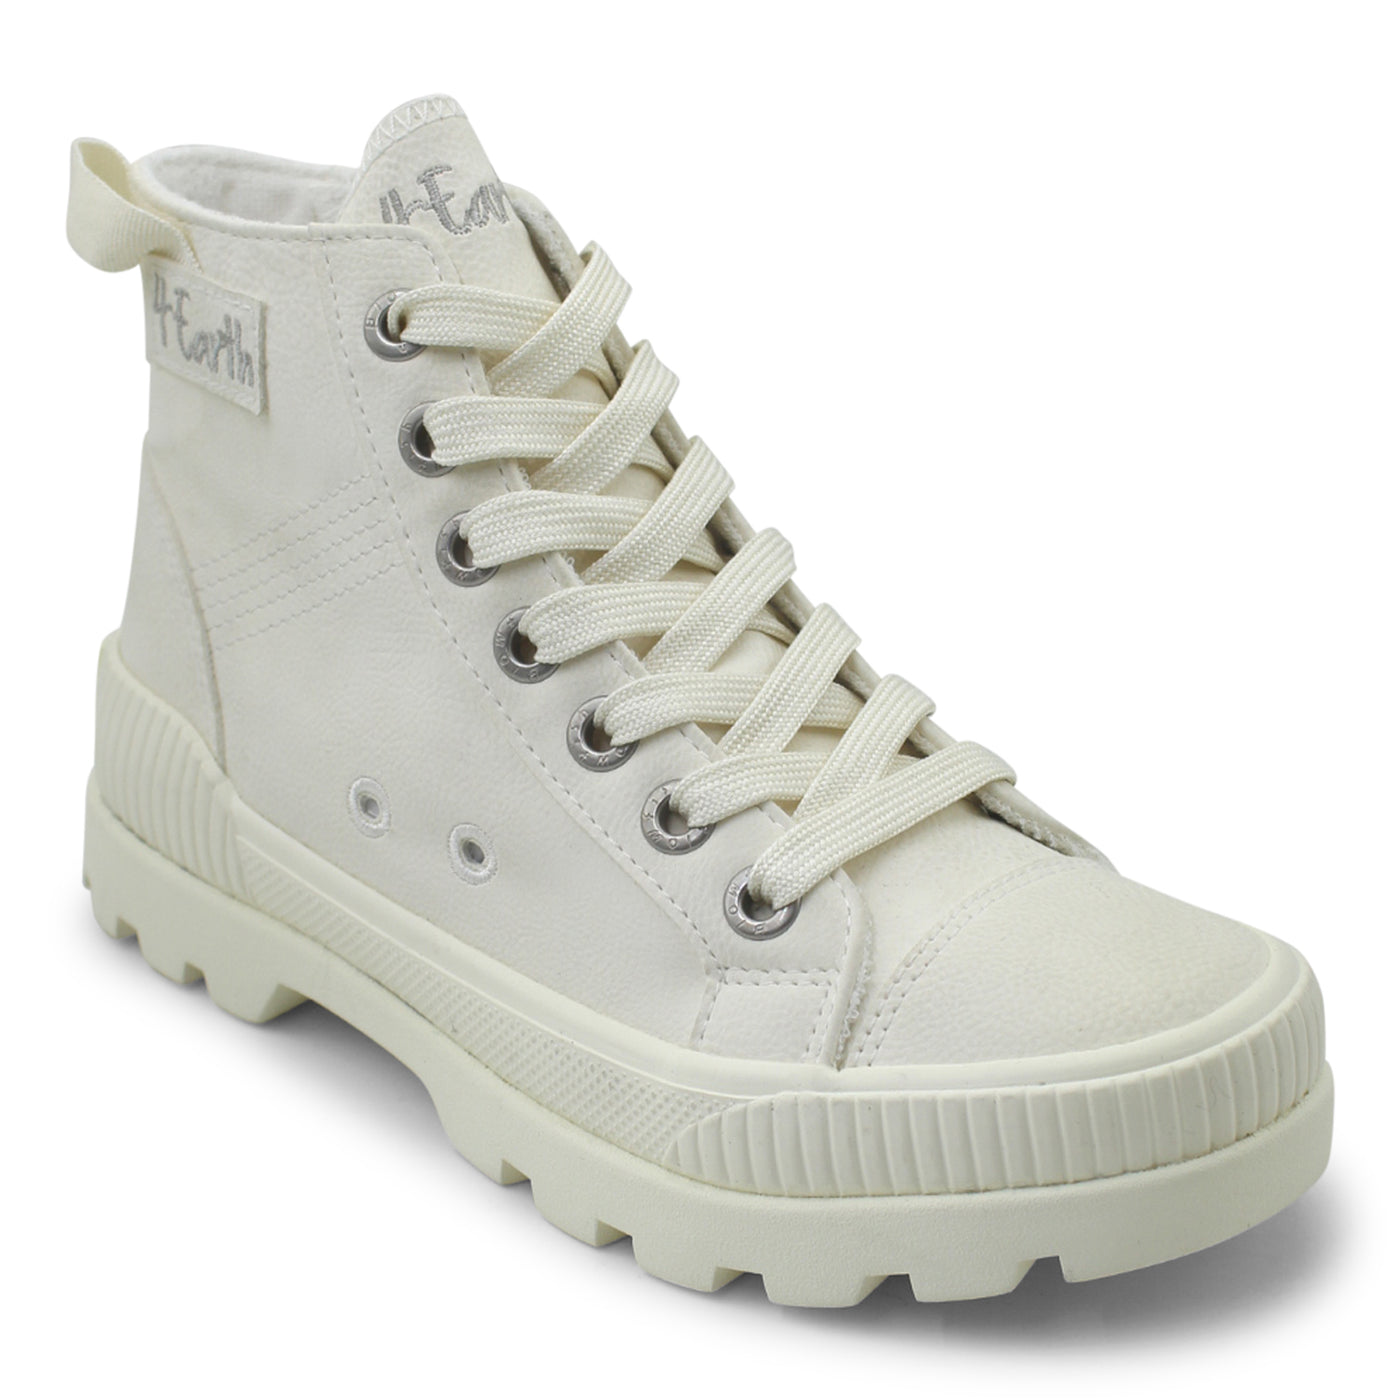 Blowfish Forever B Venus HiTop Sneaker  - Off White - PLEASE CALL FOR SIZE AVAILABILITY